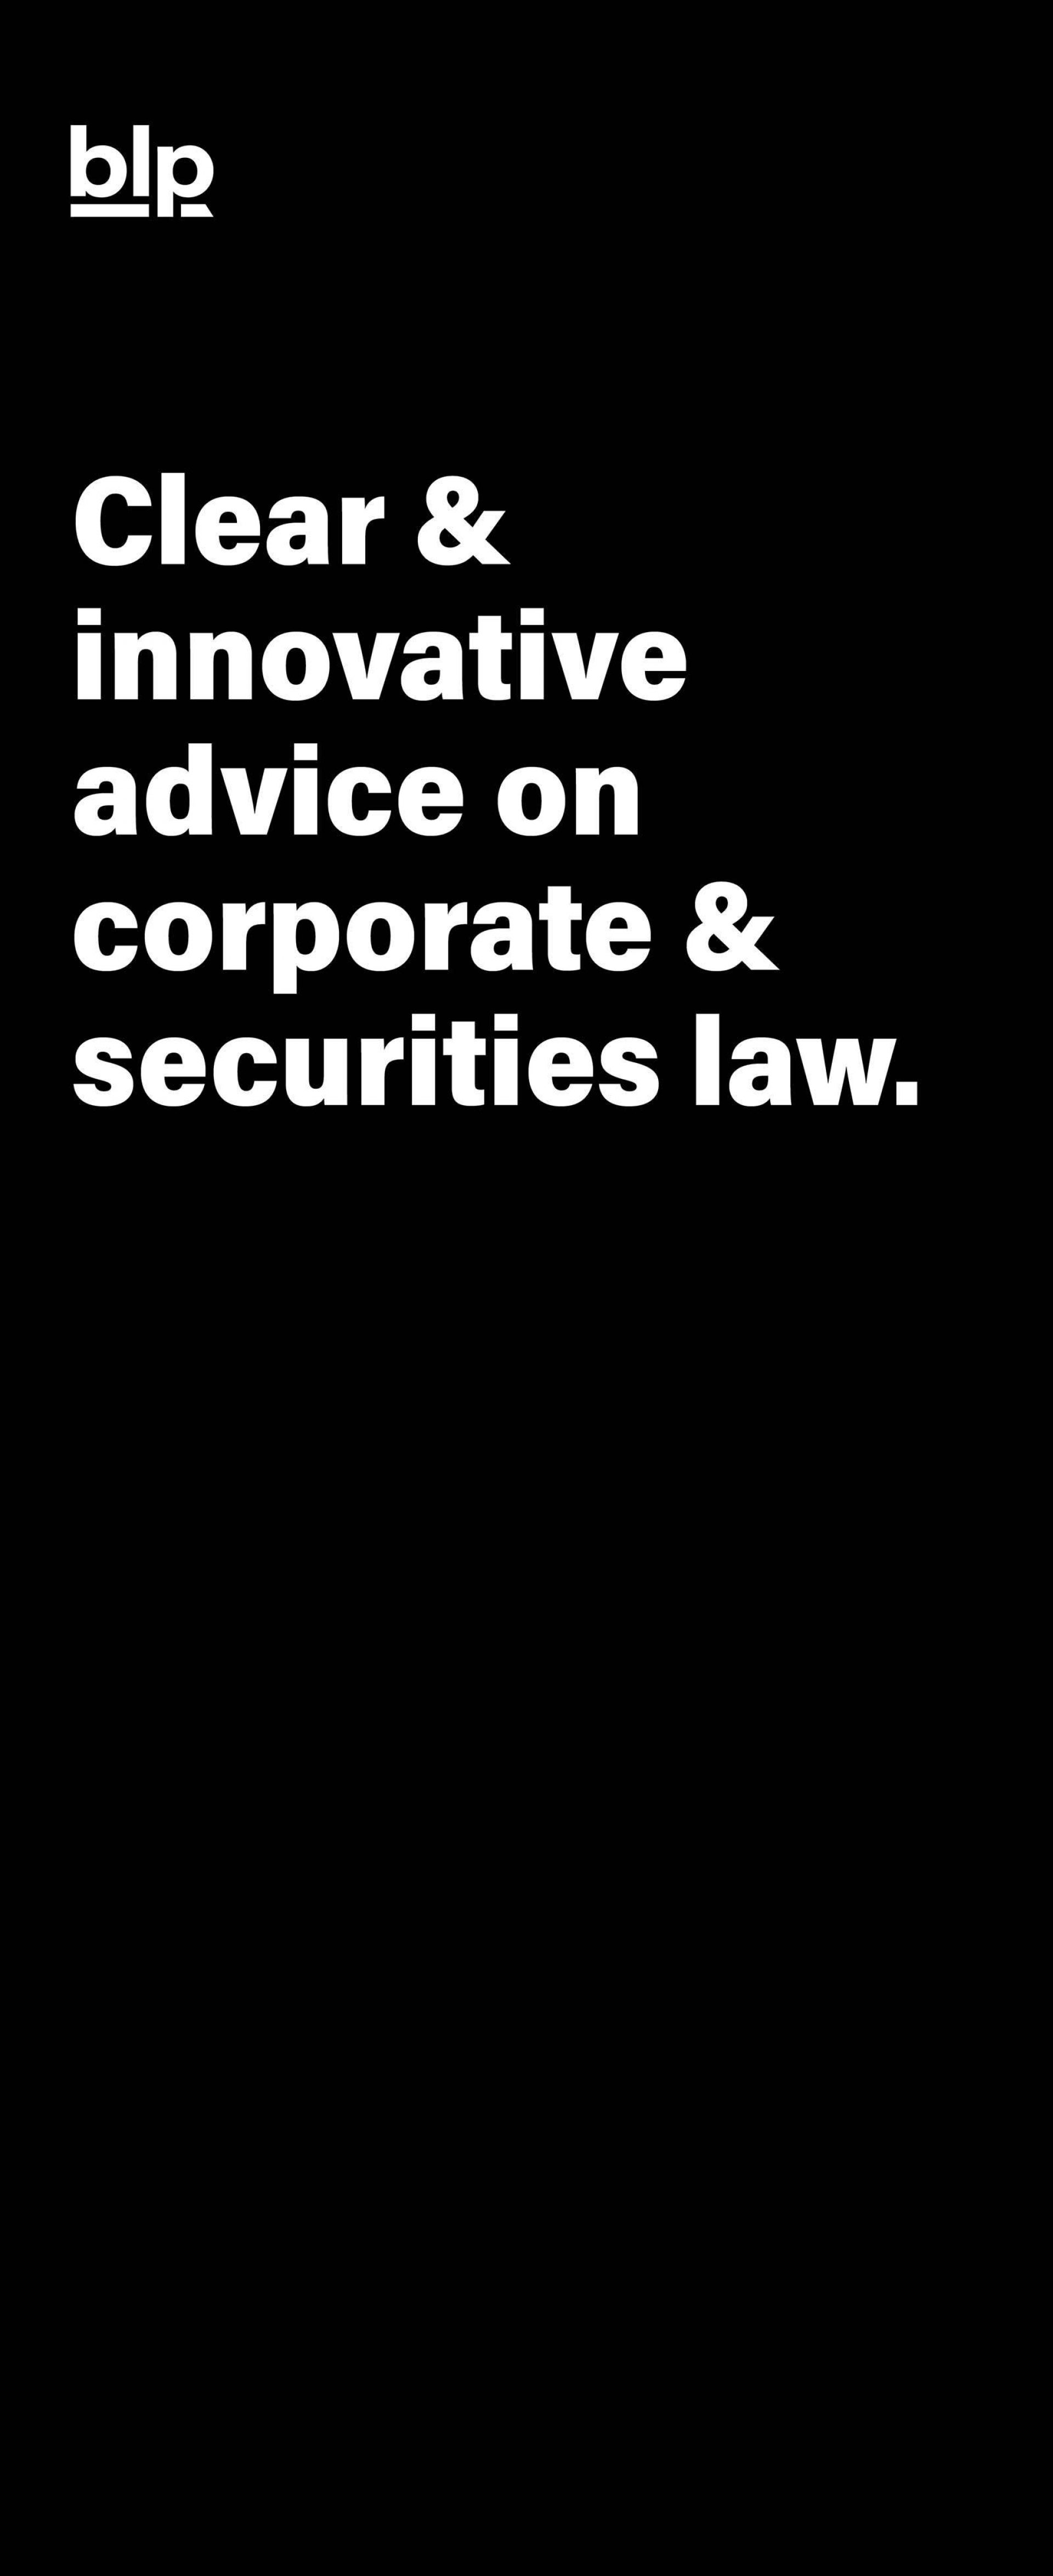 A large event banner for BLP Law that reads: "Clear & innovative advice on corporate & securities law."